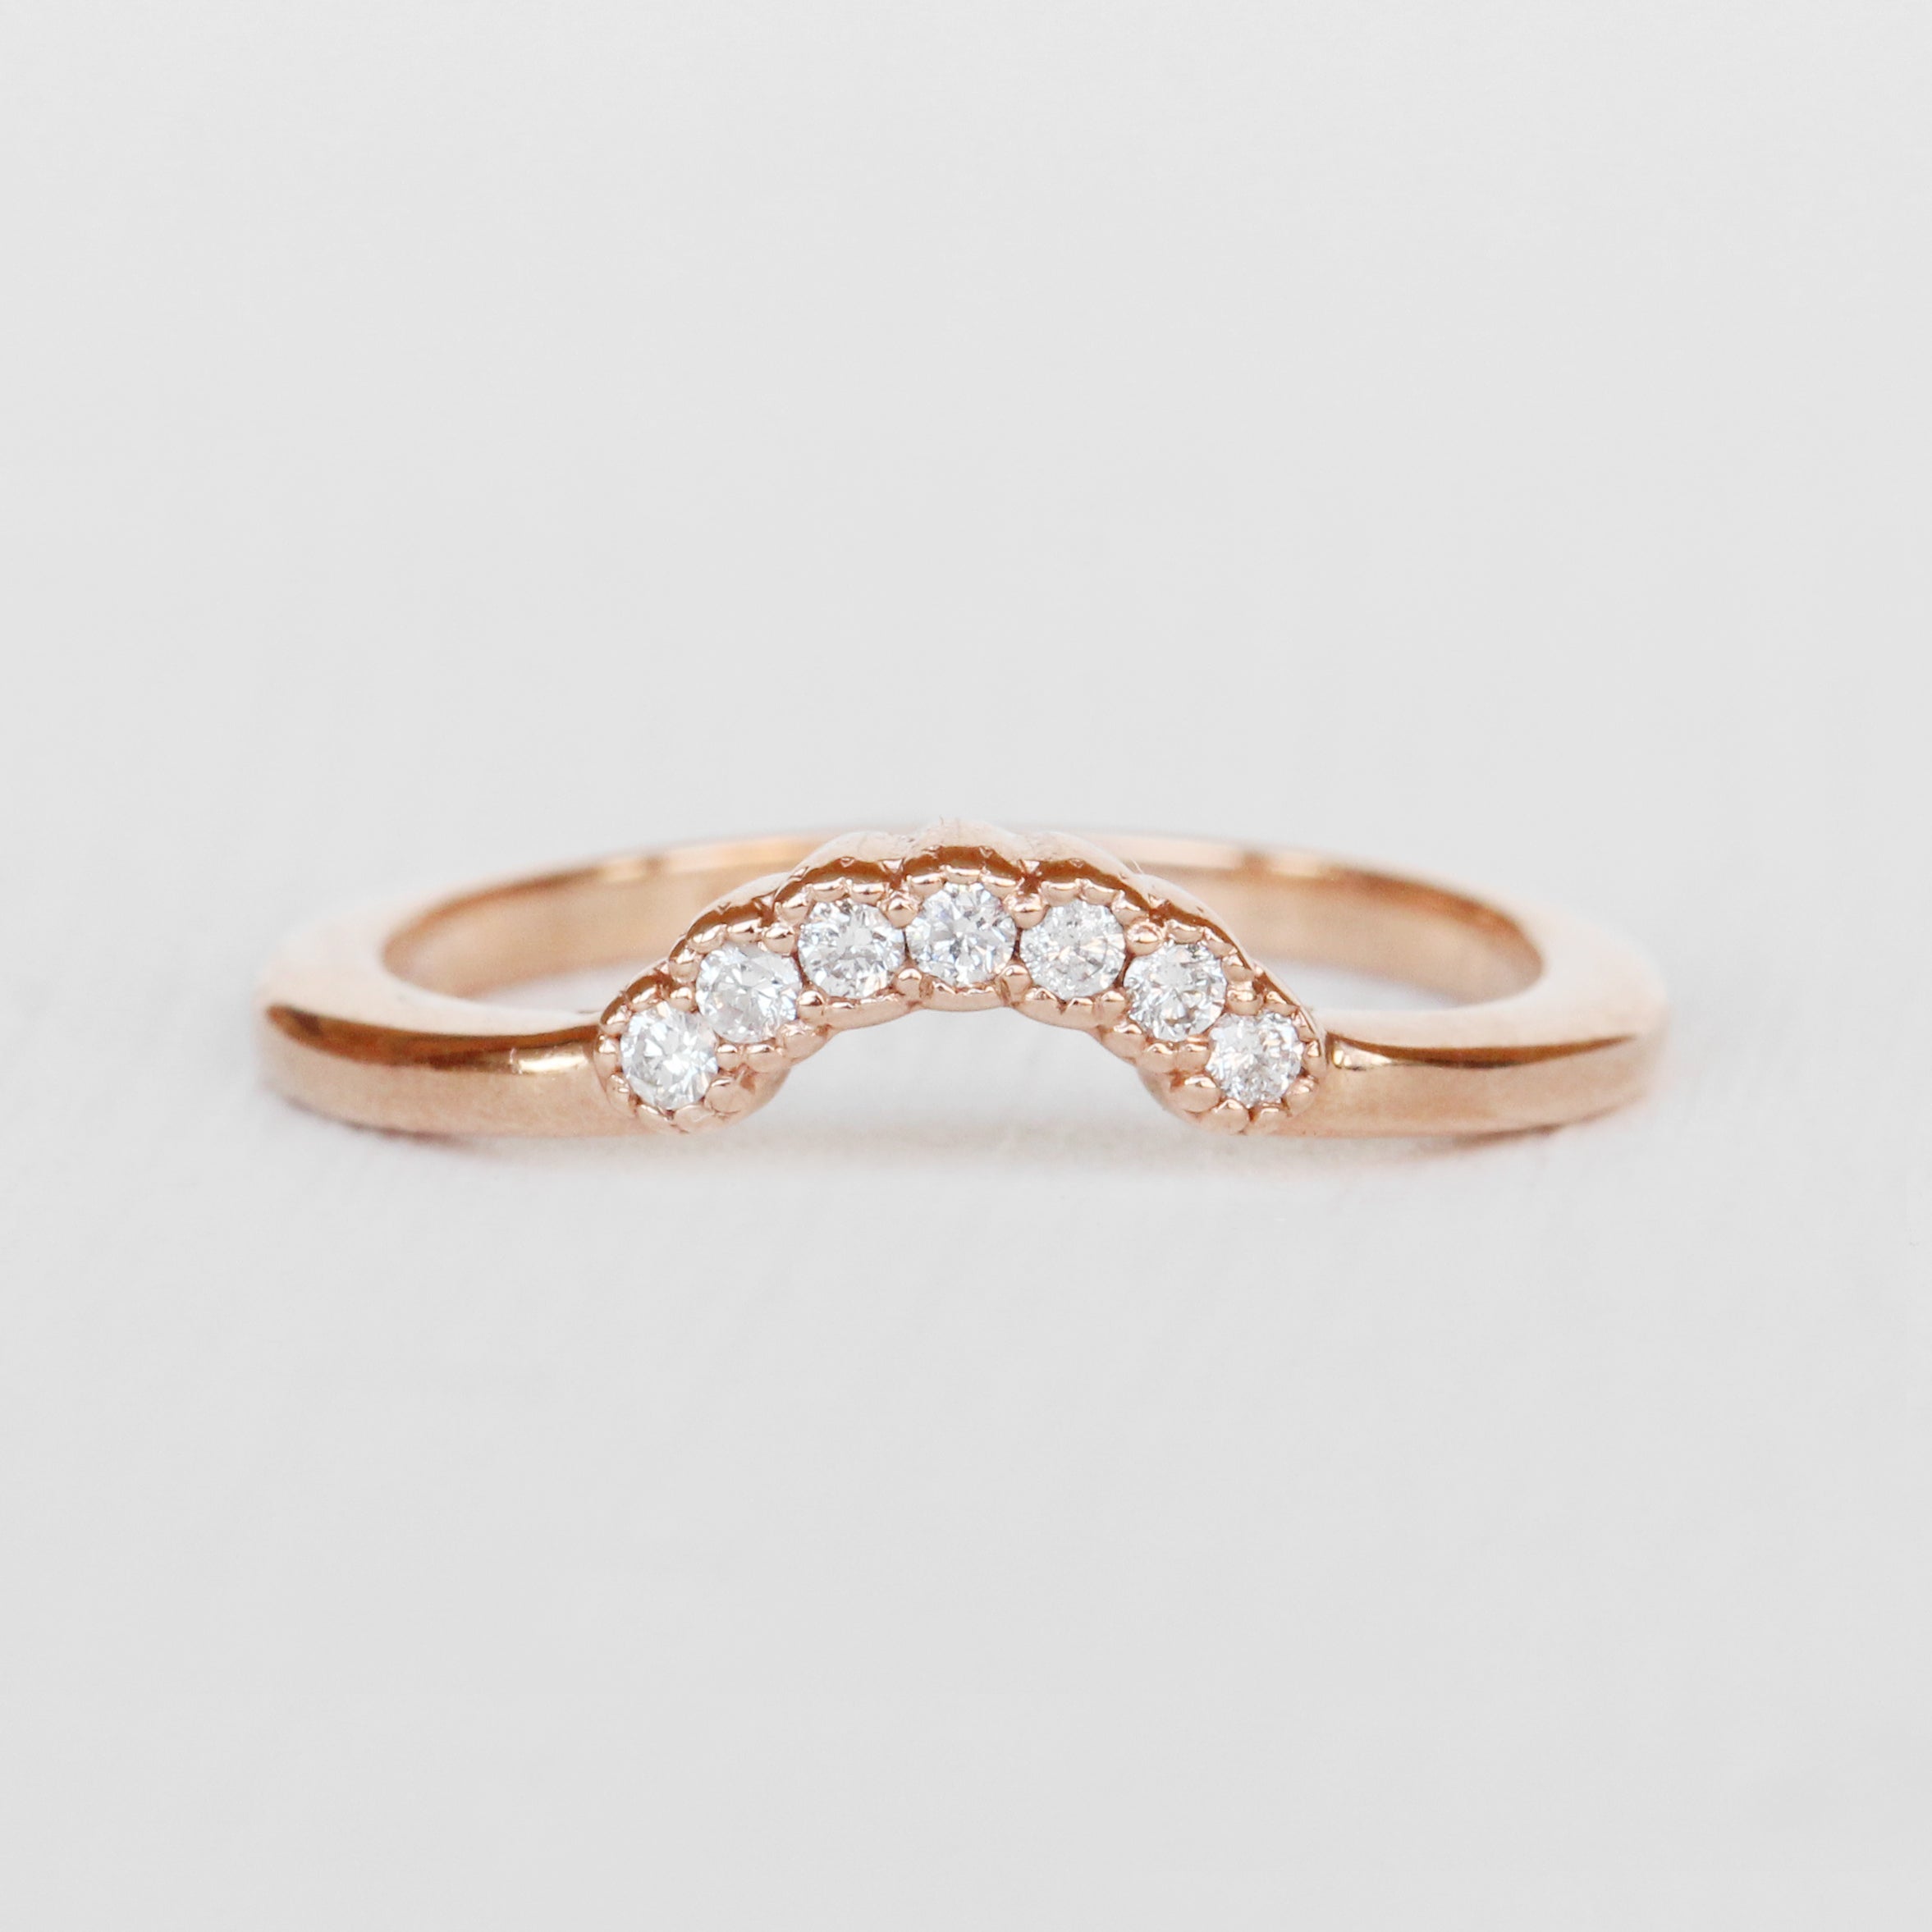 Joy - Contoured Diamond Wedding Stacking Band - made to order - Midwinter Co. Alternative Bridal Rings and Modern Fine Jewelry